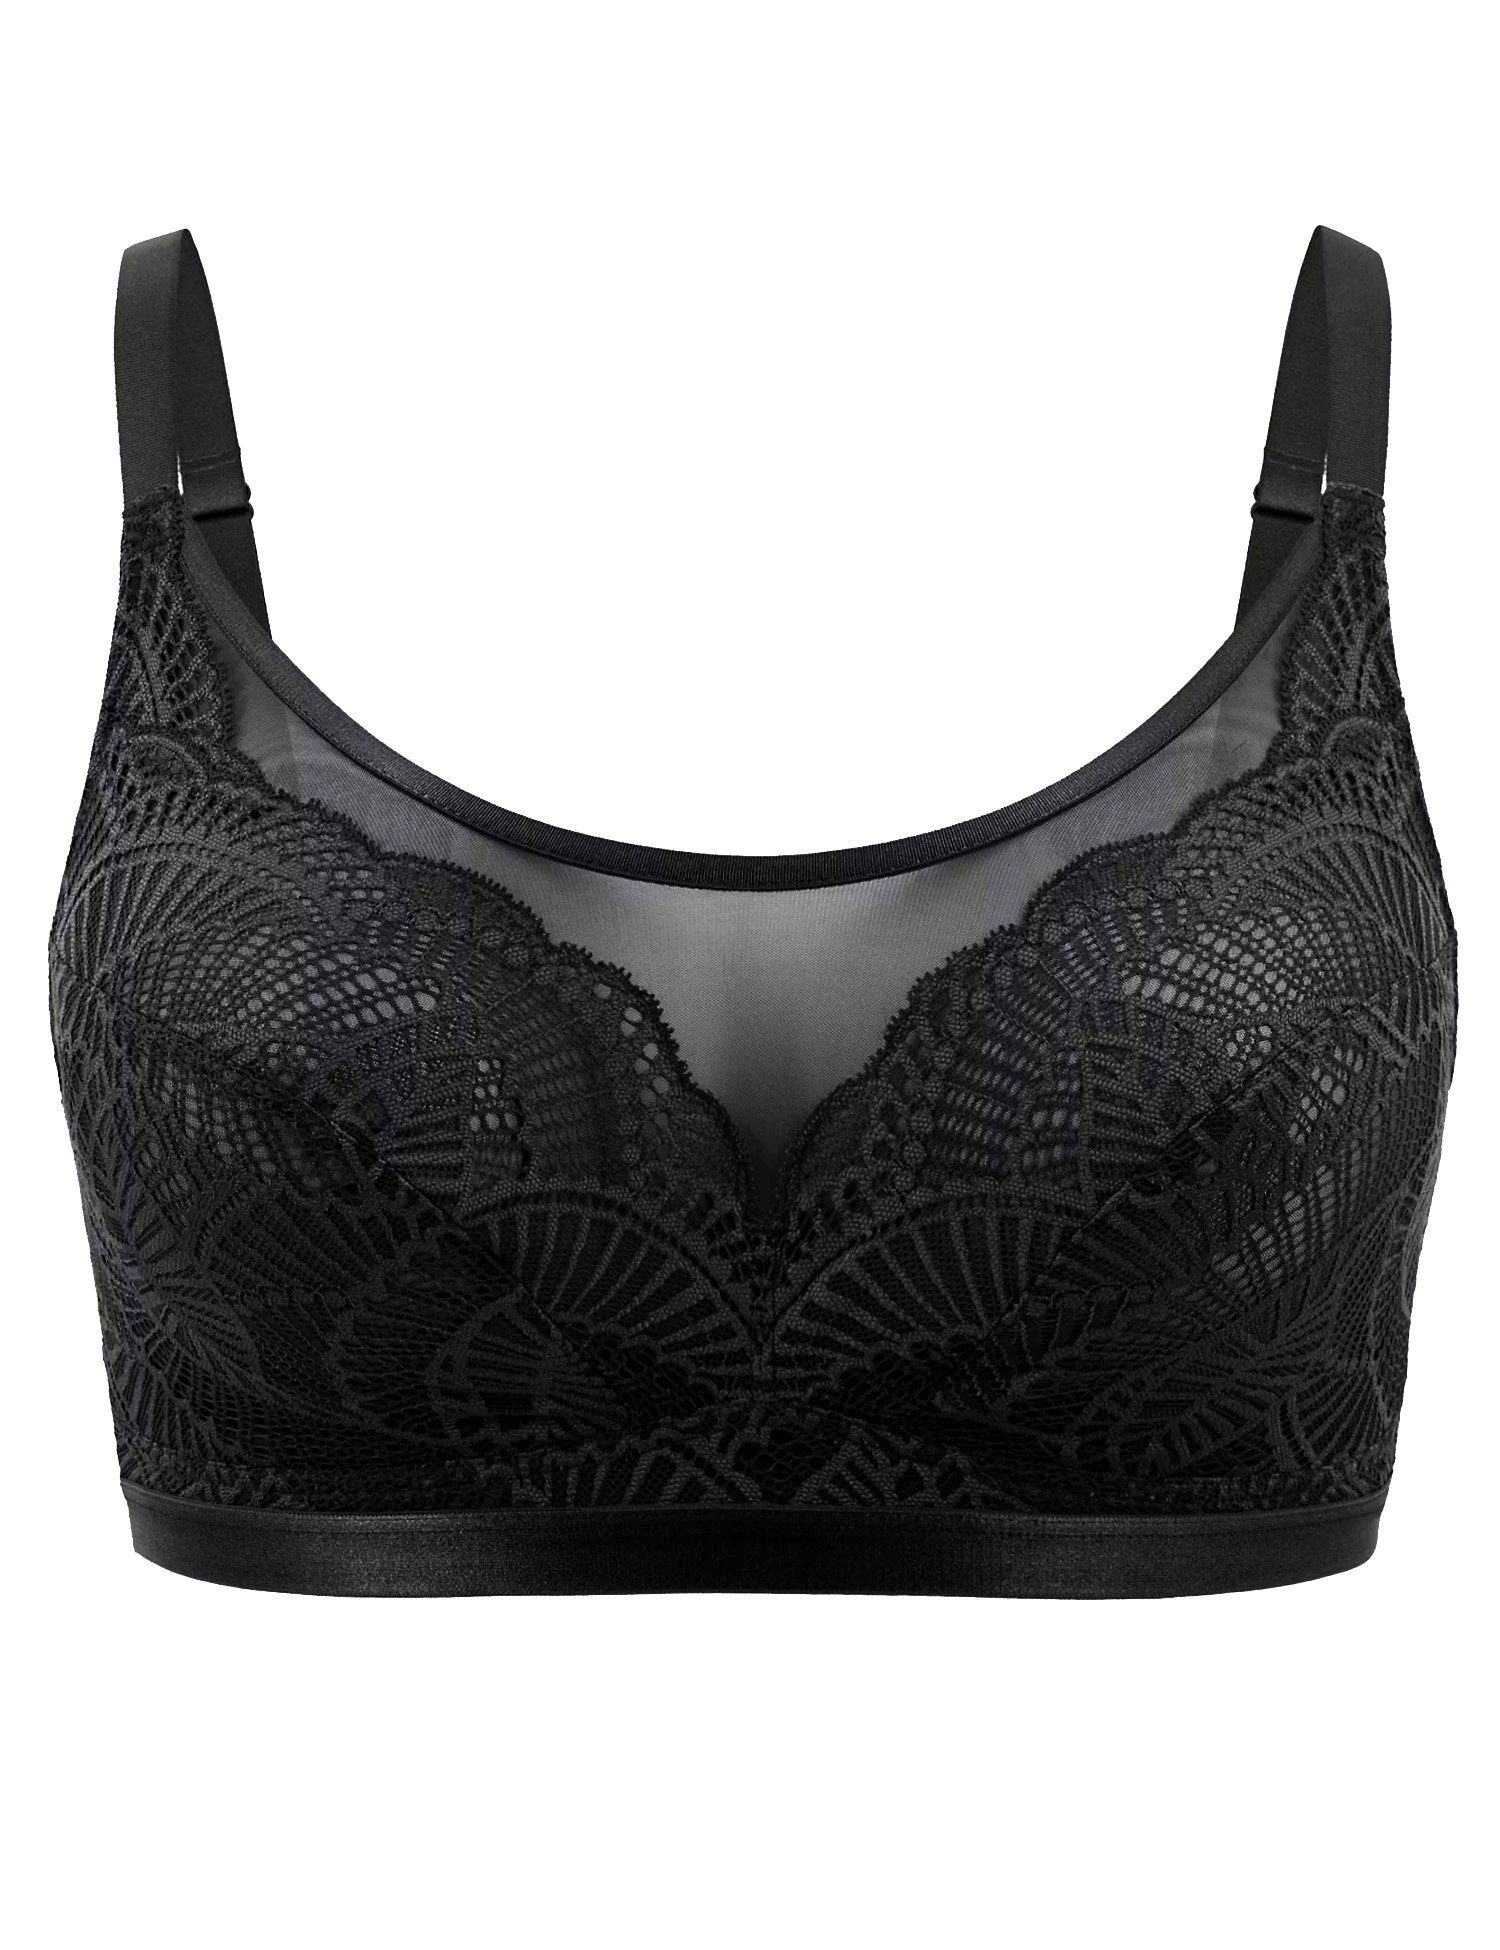 Marks and Spencer - - M&5 BLACK Mesh Lace Non-Padded Bralette - Size 32 ...